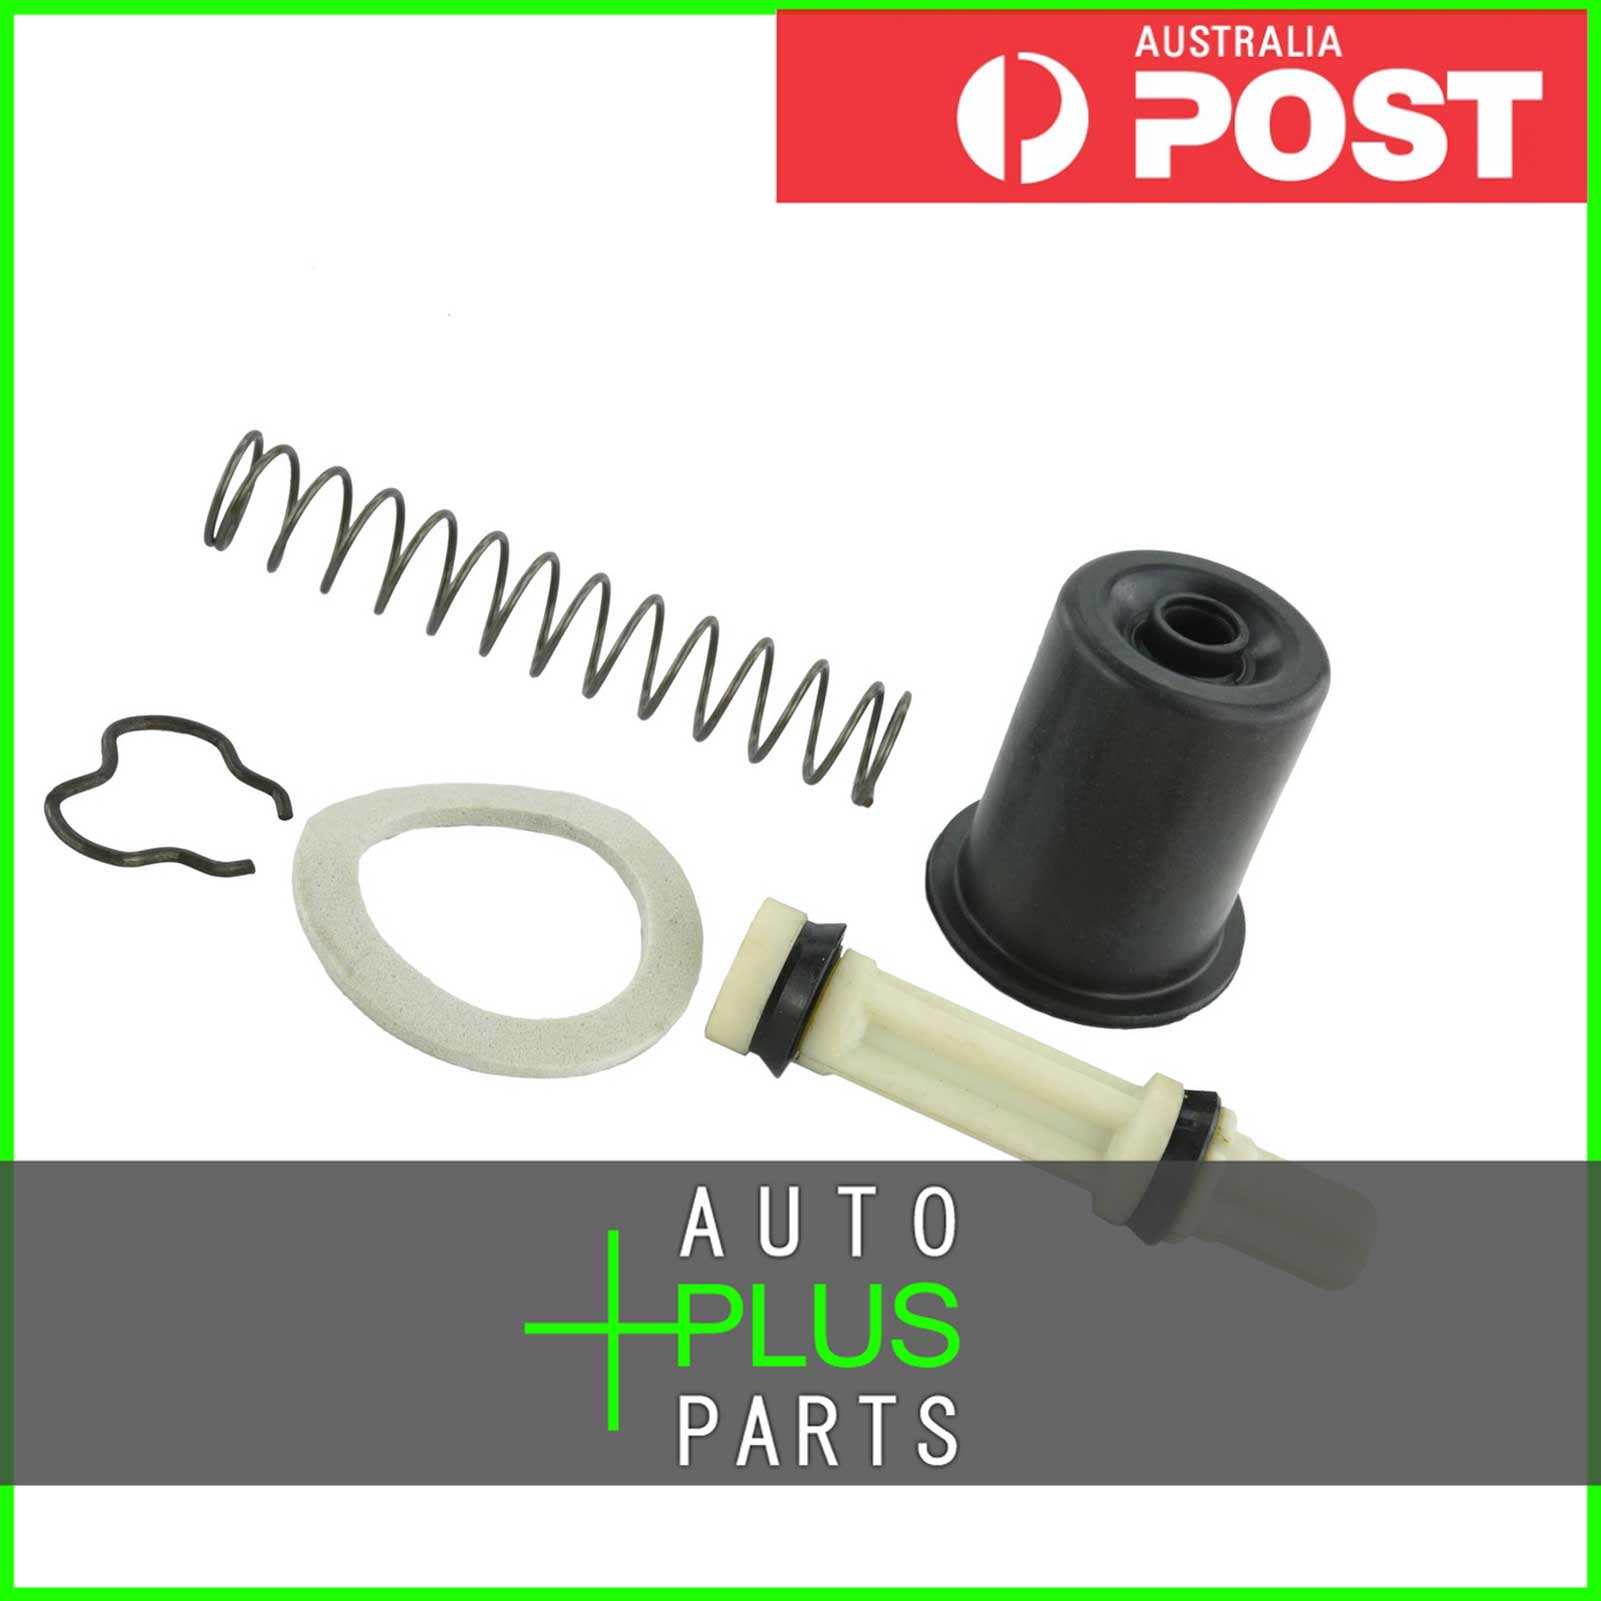 Fits NISSAN CABSTAR F24M 2006- - MASTER CLUTCH CYLINDER REPAIR KIT Product Photo